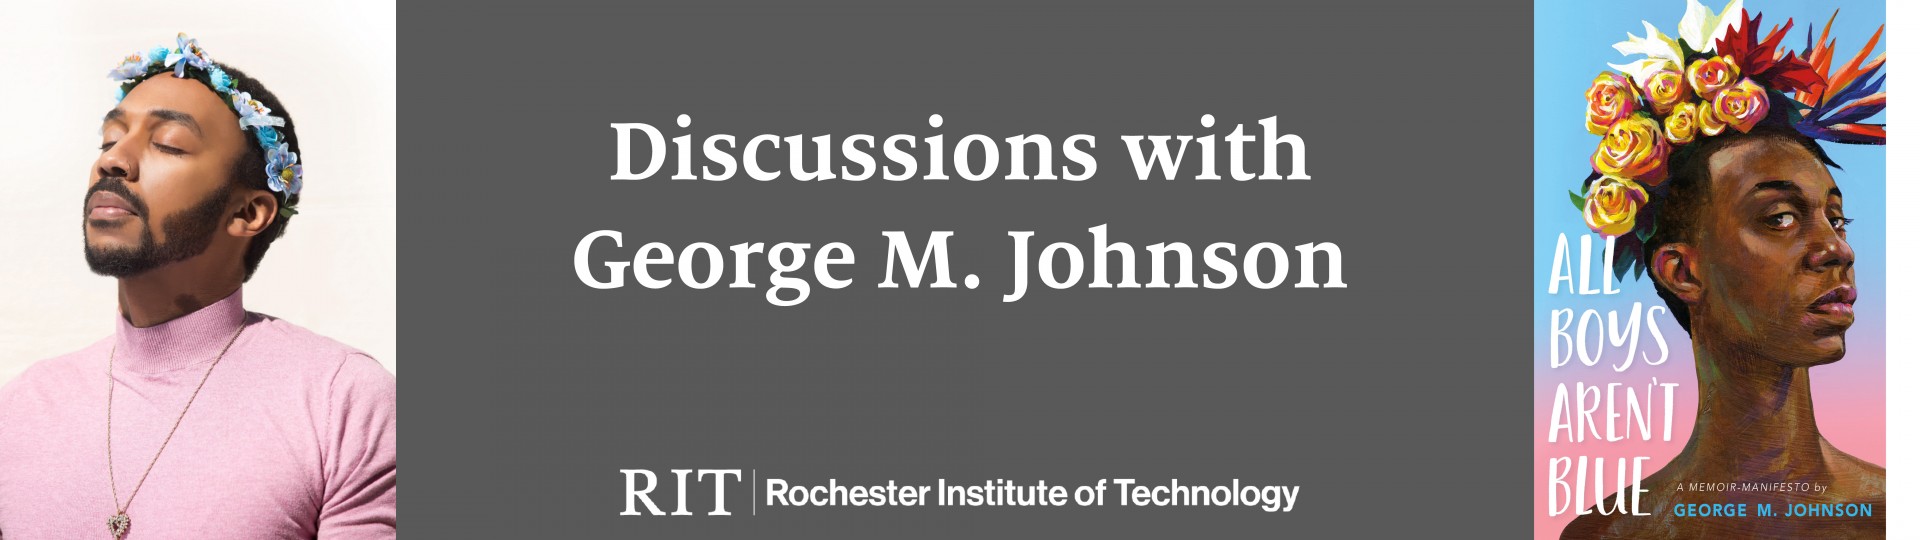 discussions with george m johnson rit